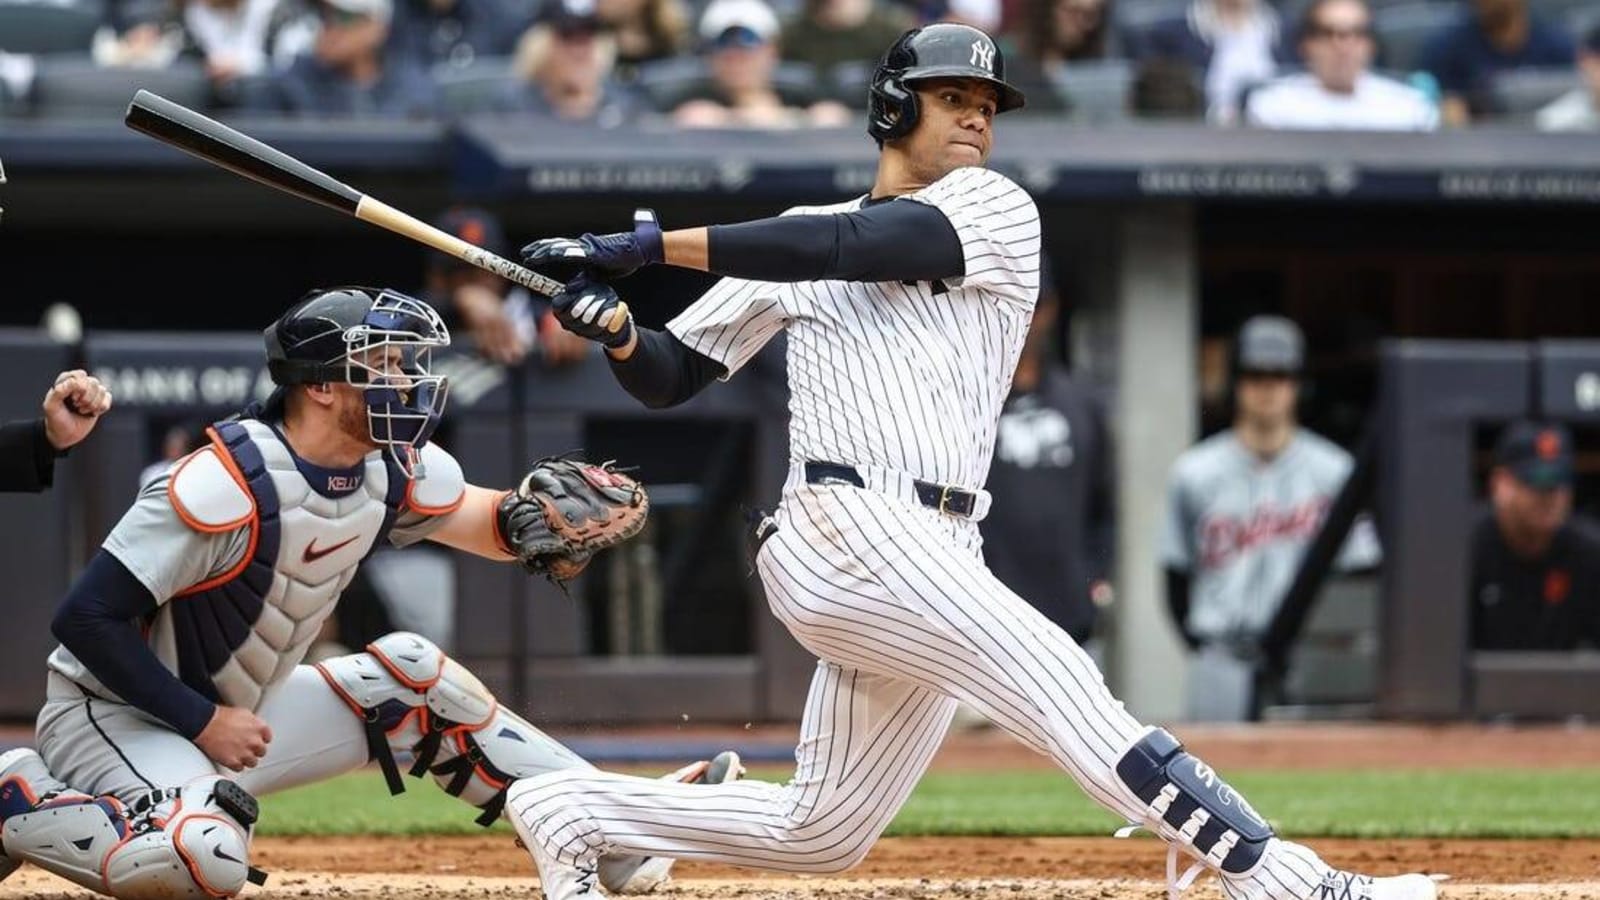 Yankees on a roll entering series with struggling Astros